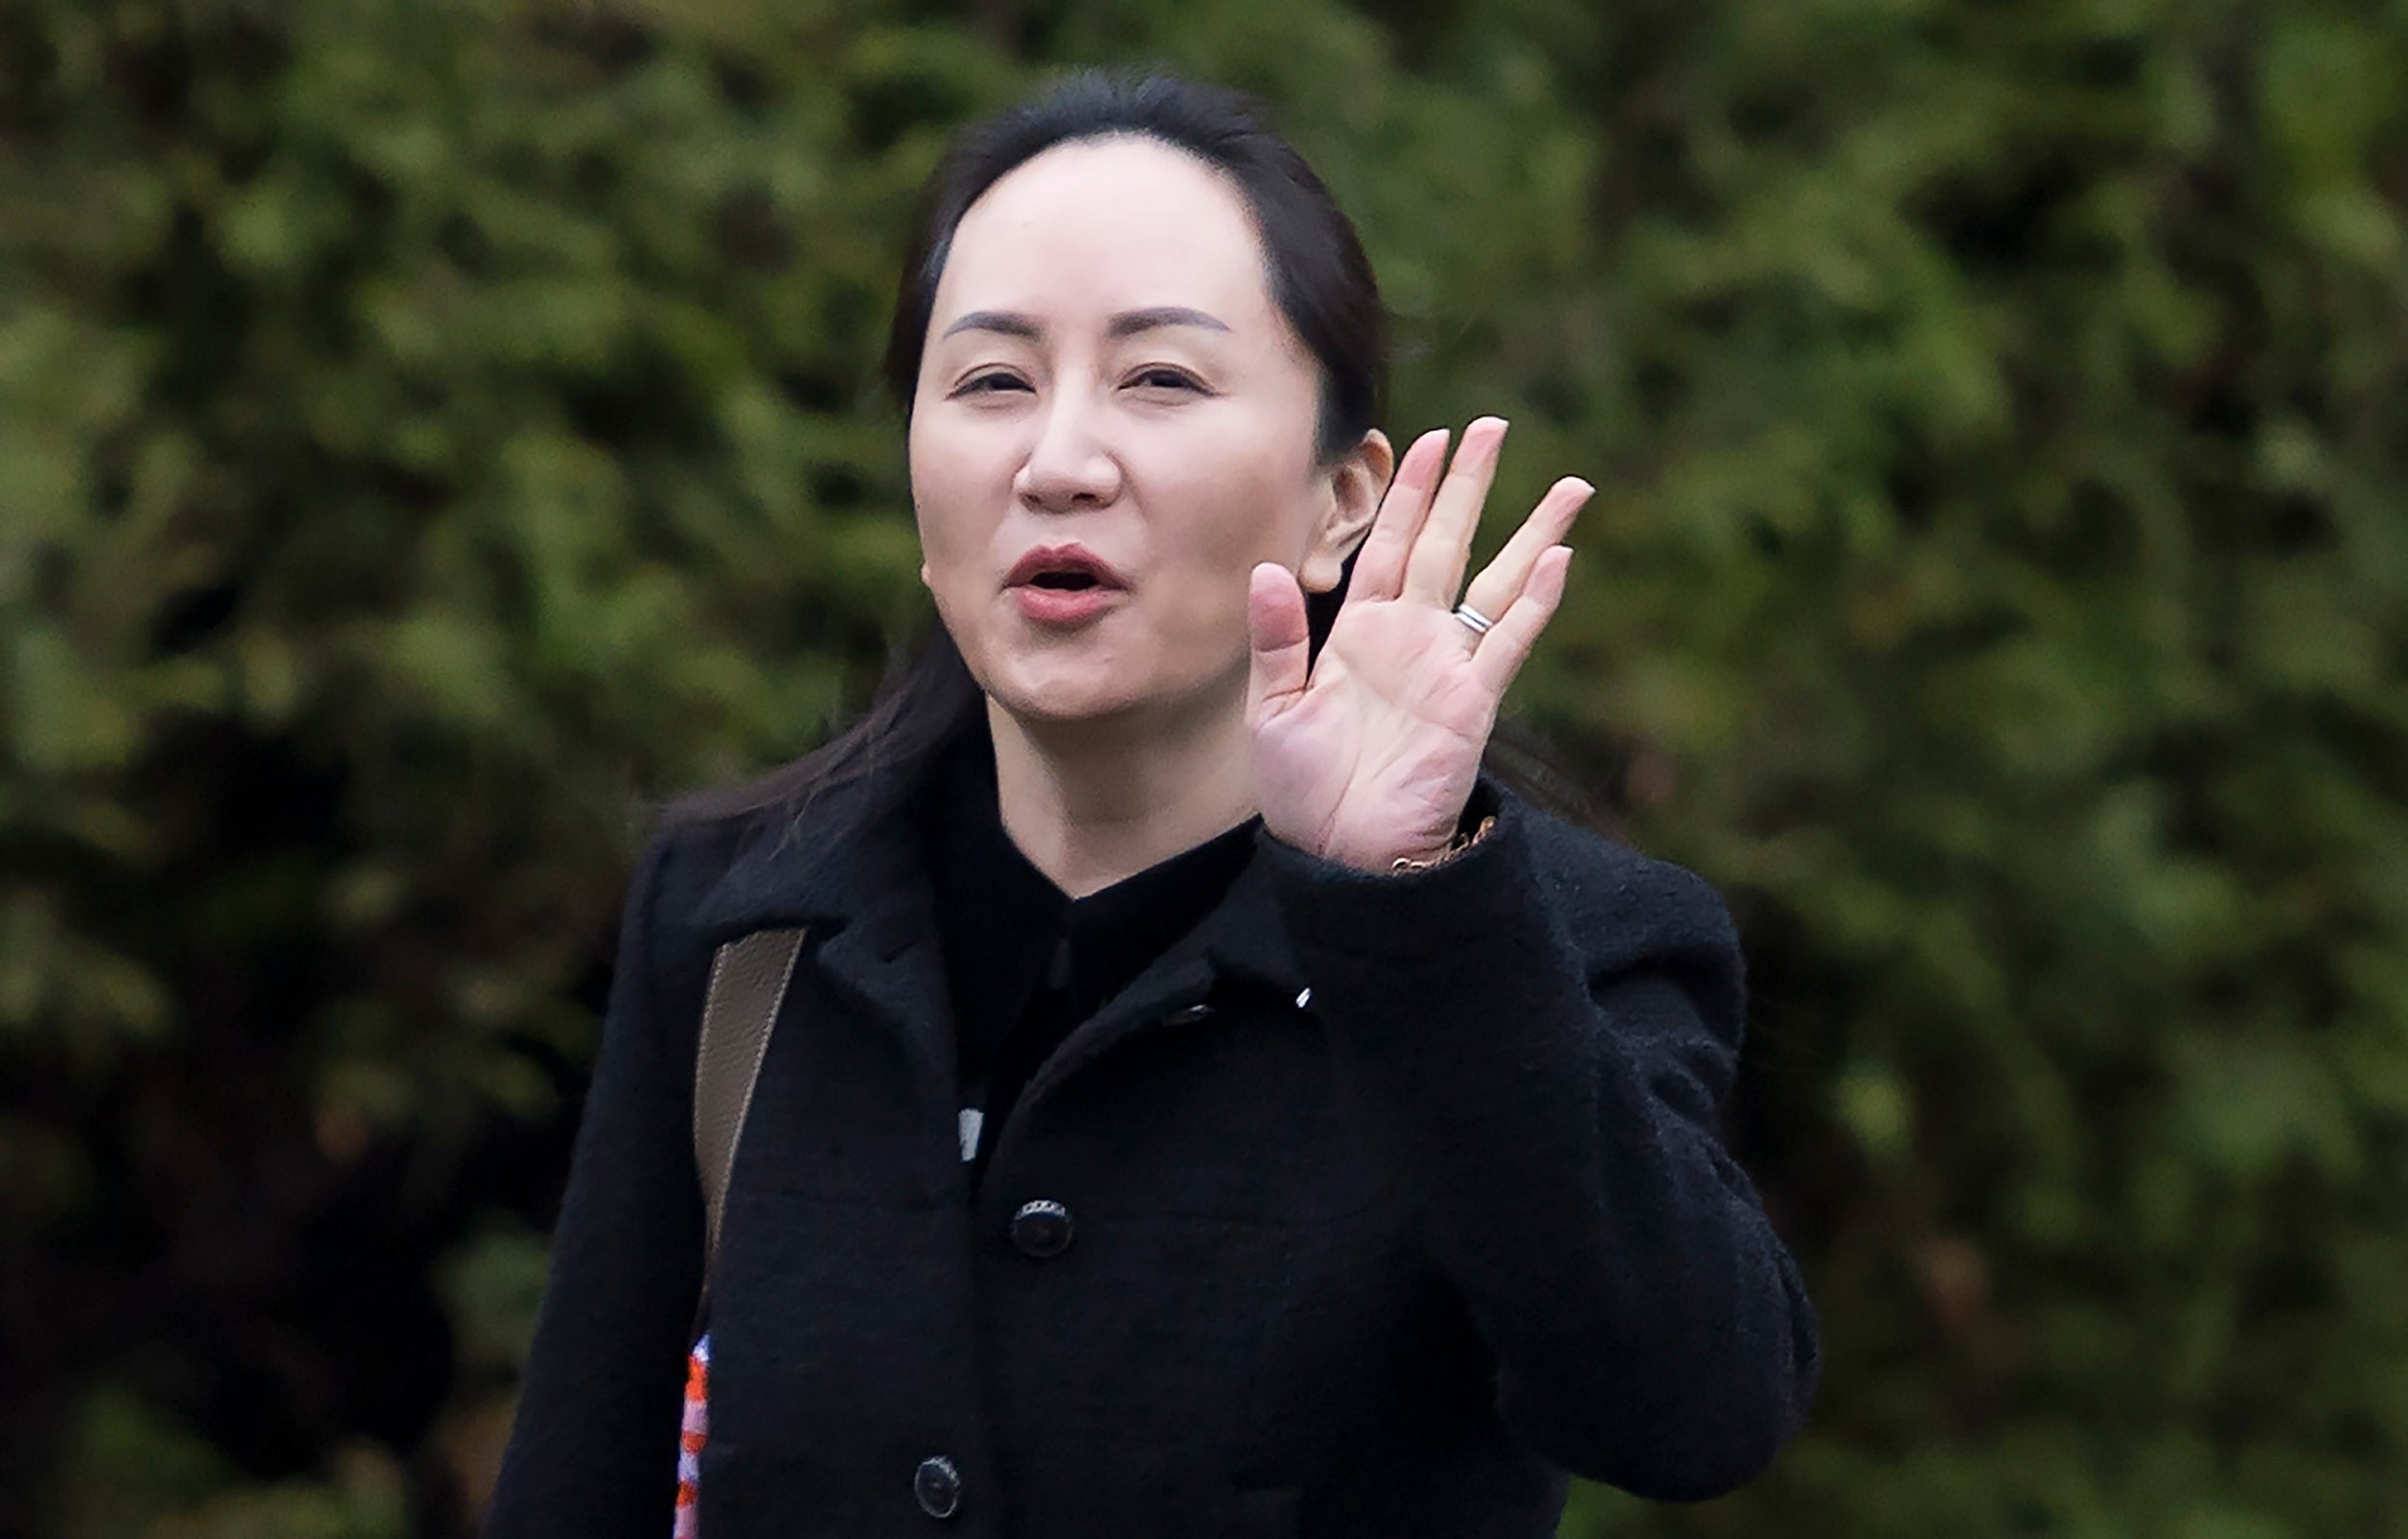 Huawei executive Meng Wanzhou leaves her home in Vancouver ahead of the first day of her extradition hearing